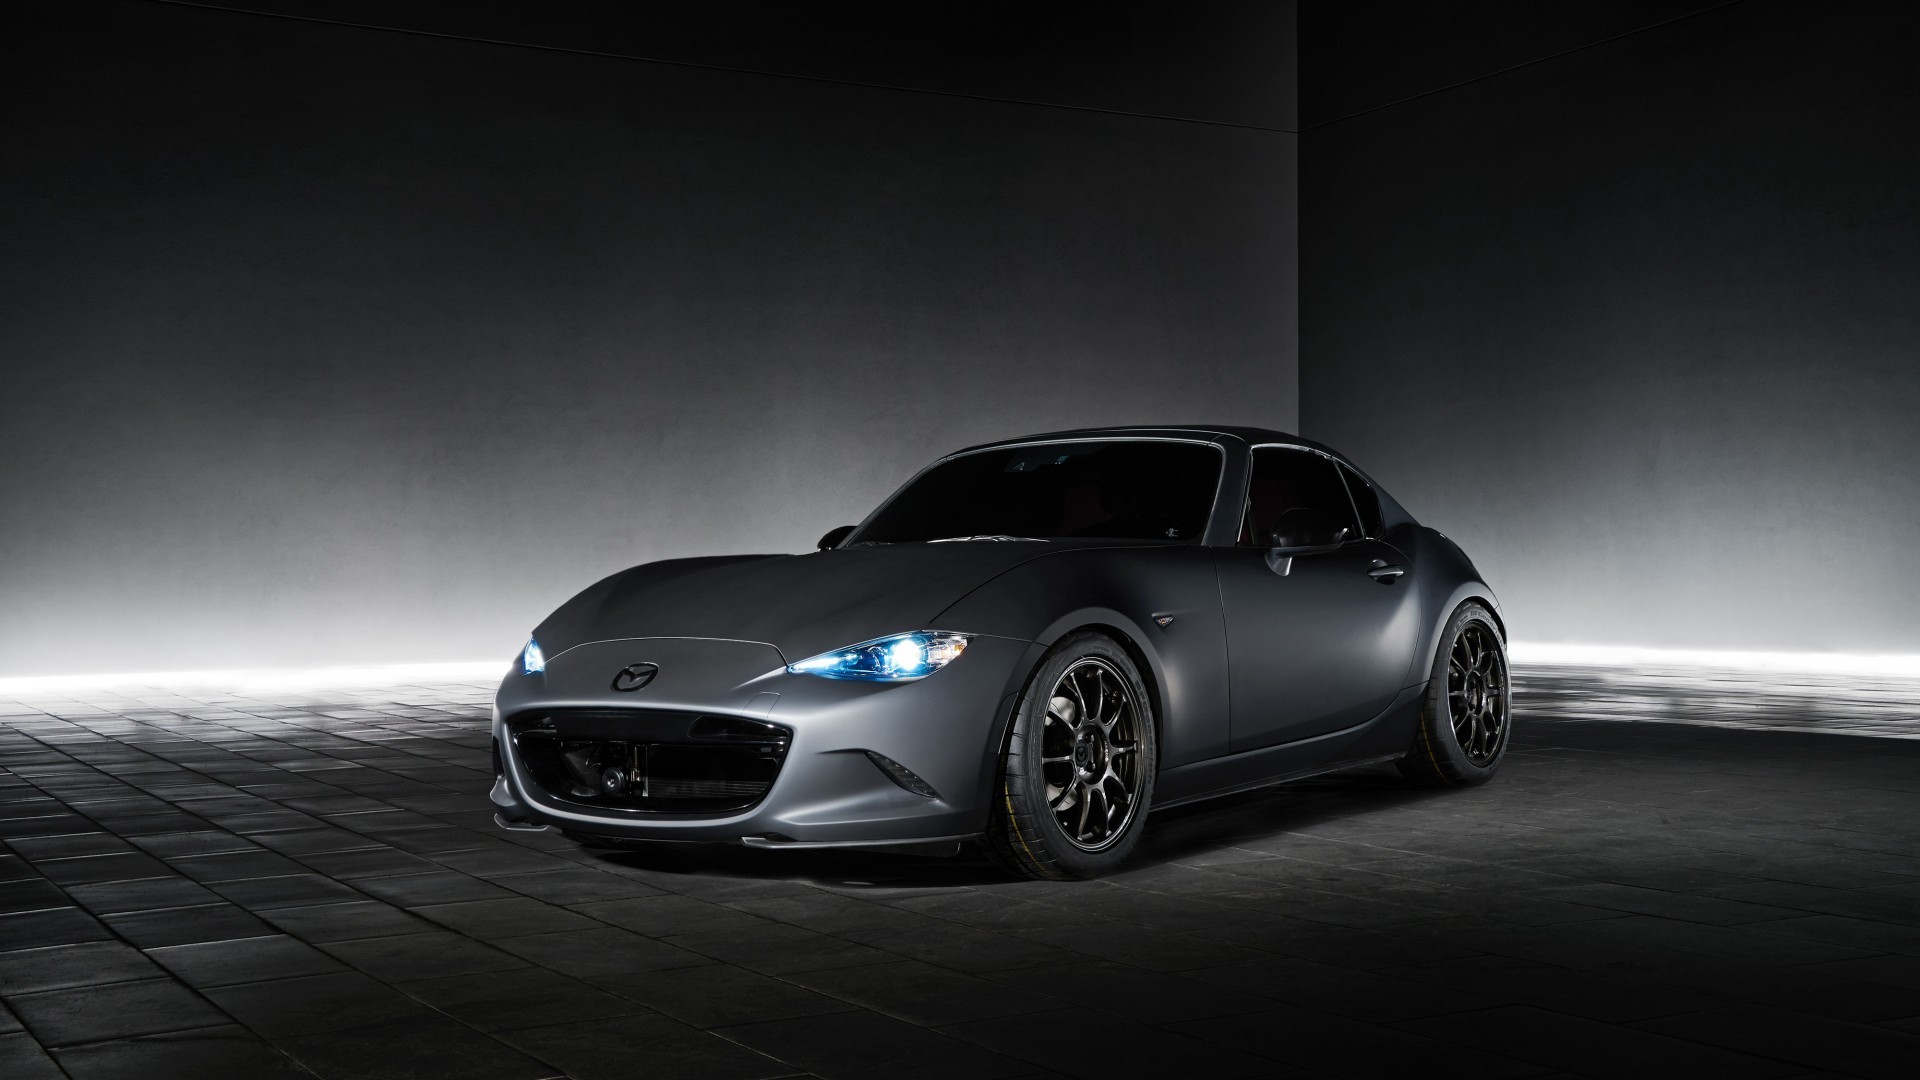 2018 Mazda Mx 5 Miata Wallpapers 64 Pictures Images, Photos, Reviews